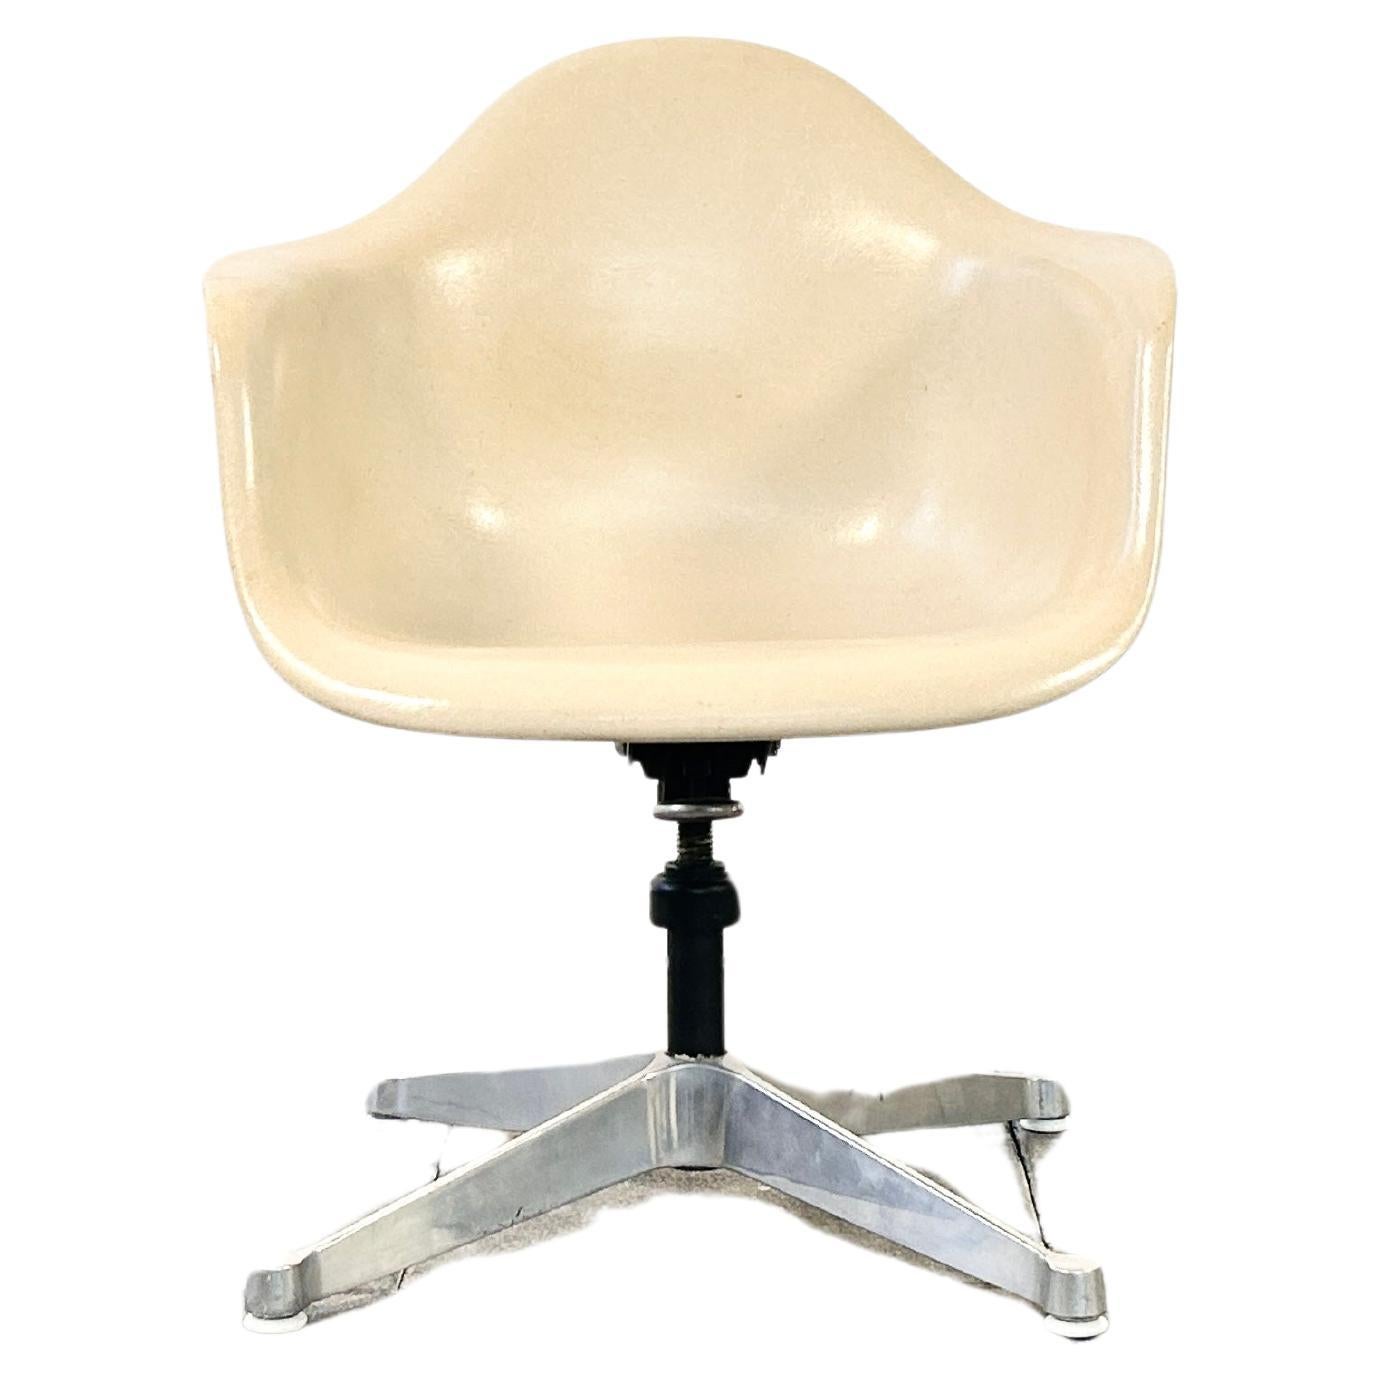 Herman Miller DAT fibre plastic armchair on office base,

Designed by Charles & Ray Eames in 1948.

Off-white fibre plastic armshell, DAT shivel base equipped with tilt function, height adjustable.

The chair is in very good vintage condition with